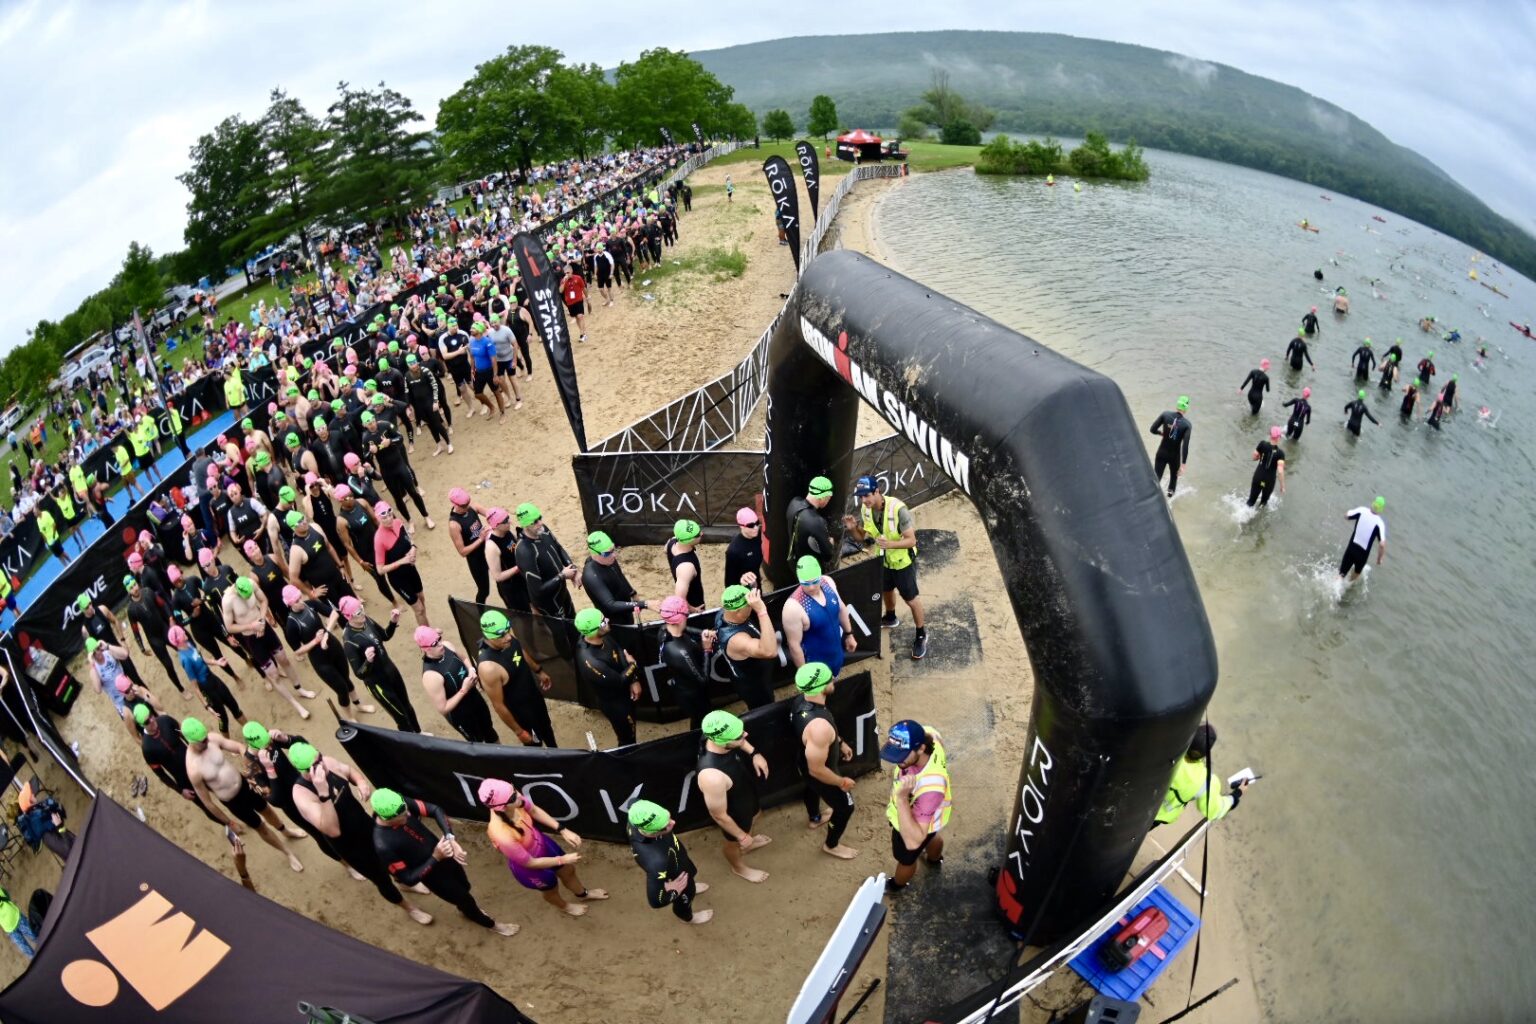 Scenes from the First Ironman 70.3 Pennsylvania Happy Valley State